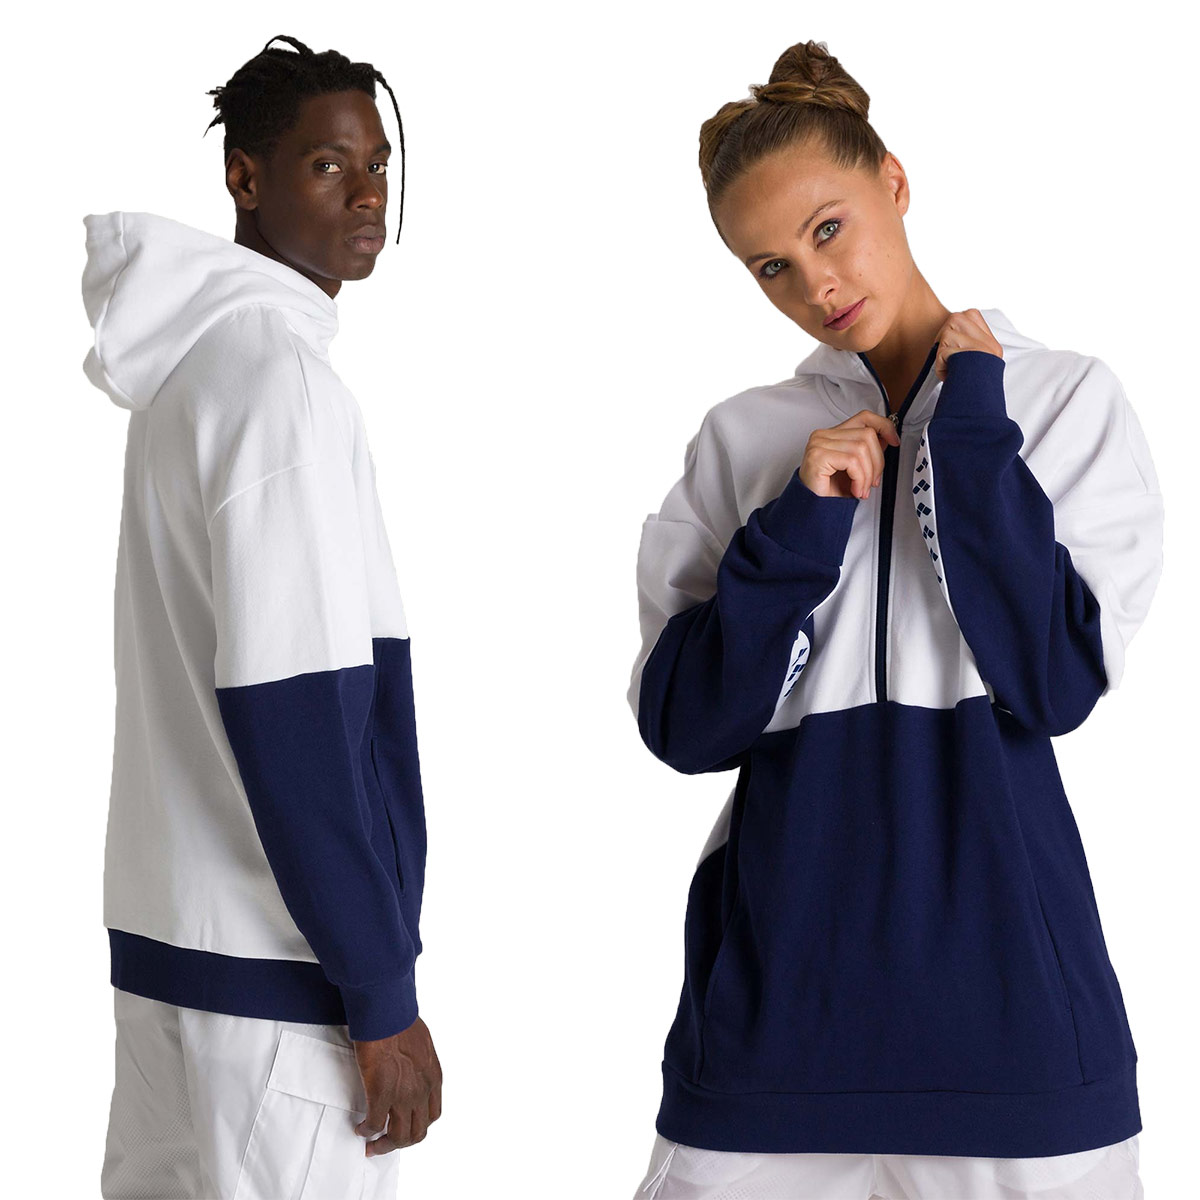 Arena Team 1/2 Zip Hooded Sweater - Navy Blue/ White